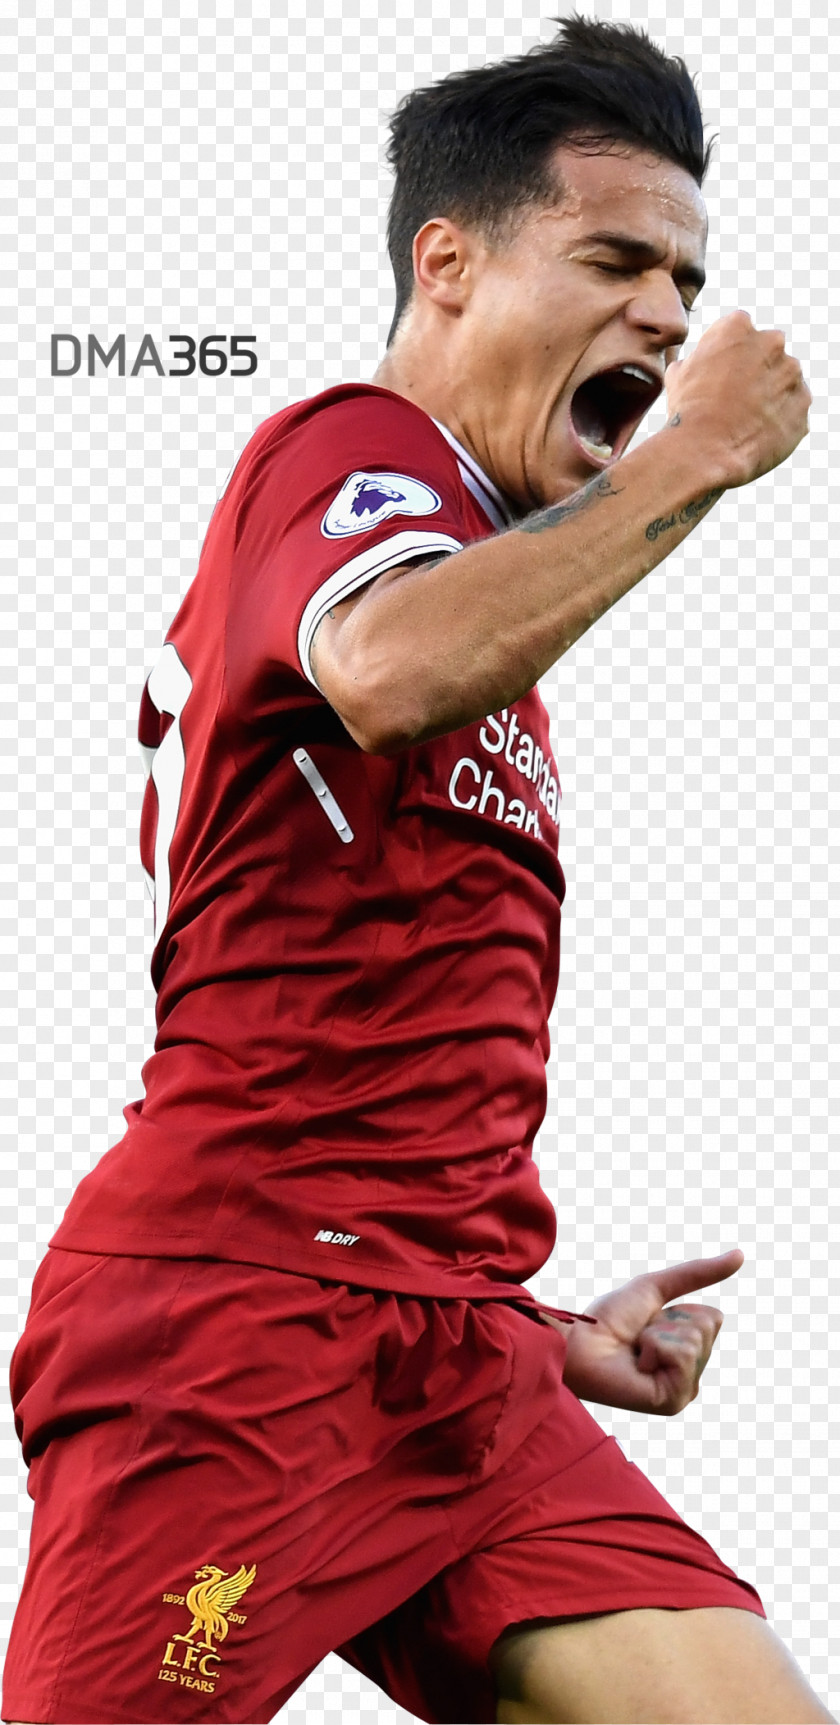 Felipe Coutinho Philippe Jersey Football Player ユニフォーム PNG